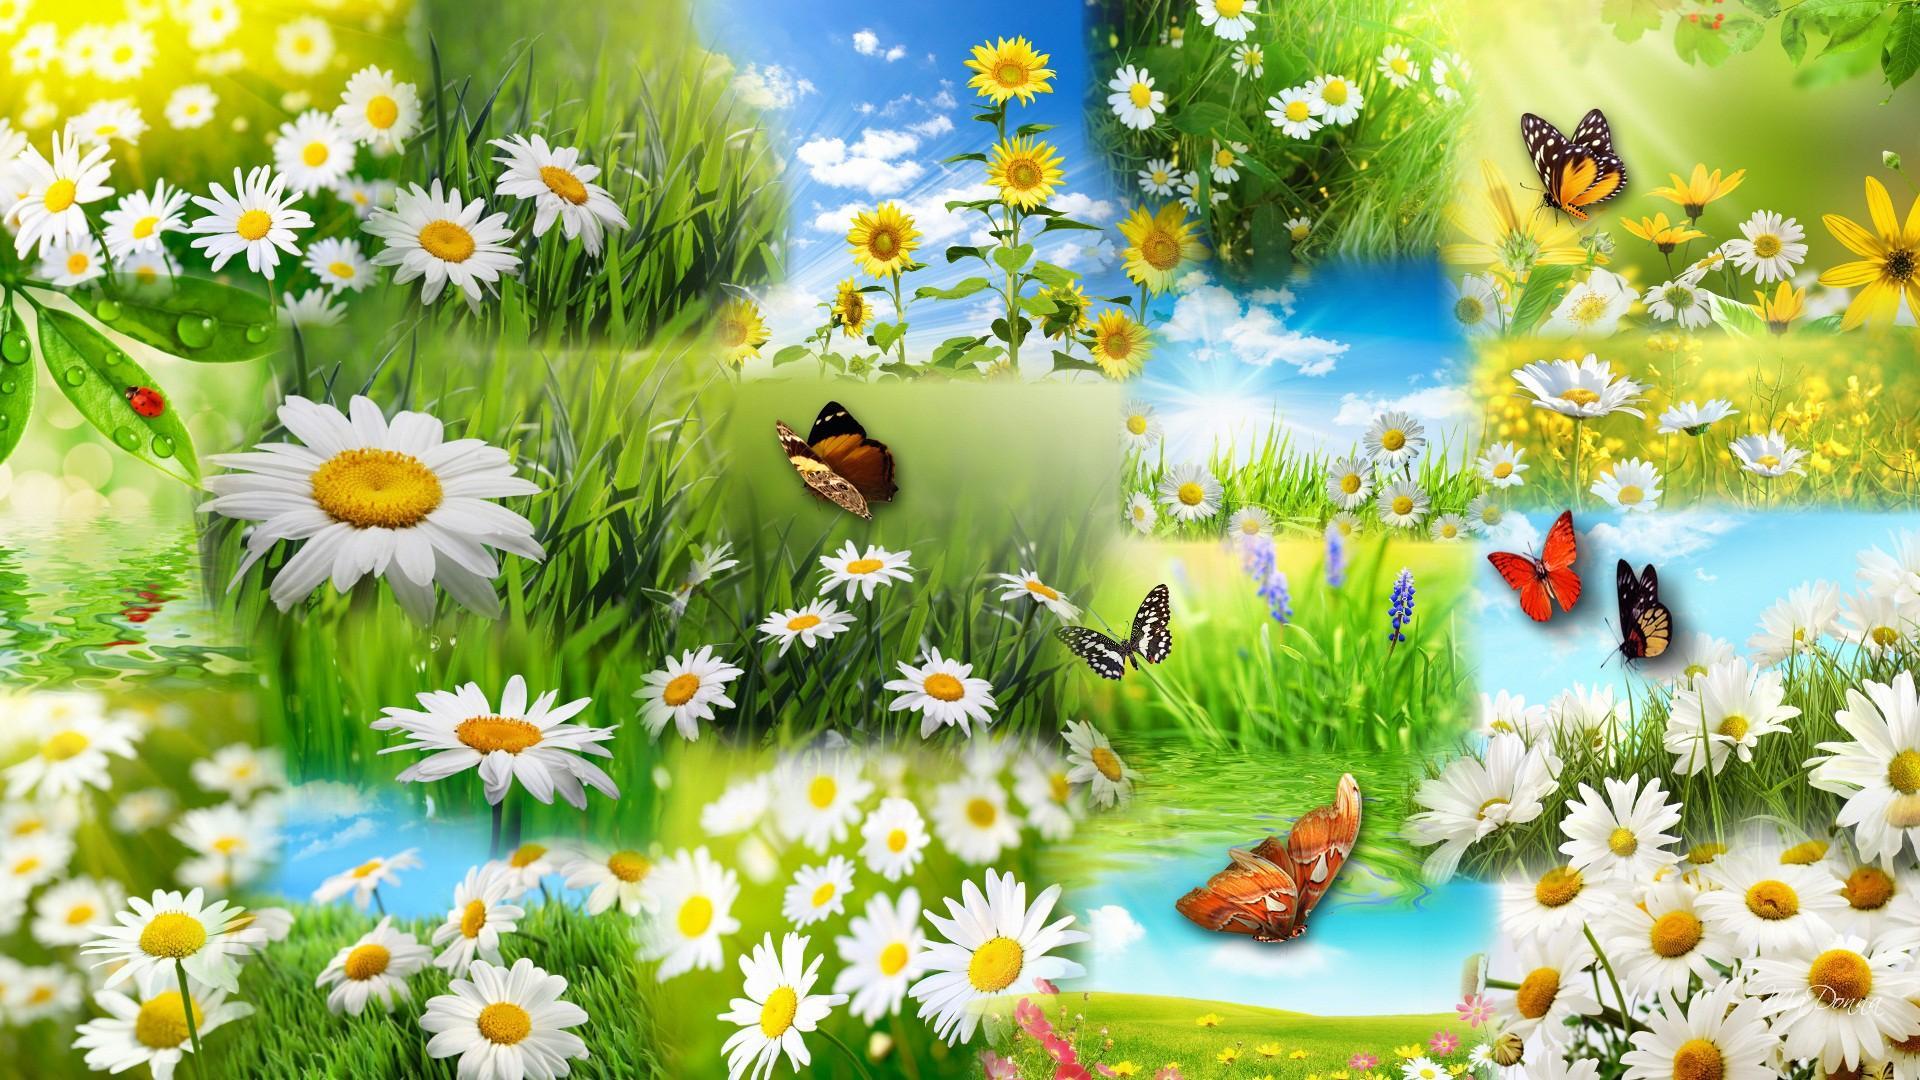 Daisy and Butterfly Collage HD Wallpaper. Background Image